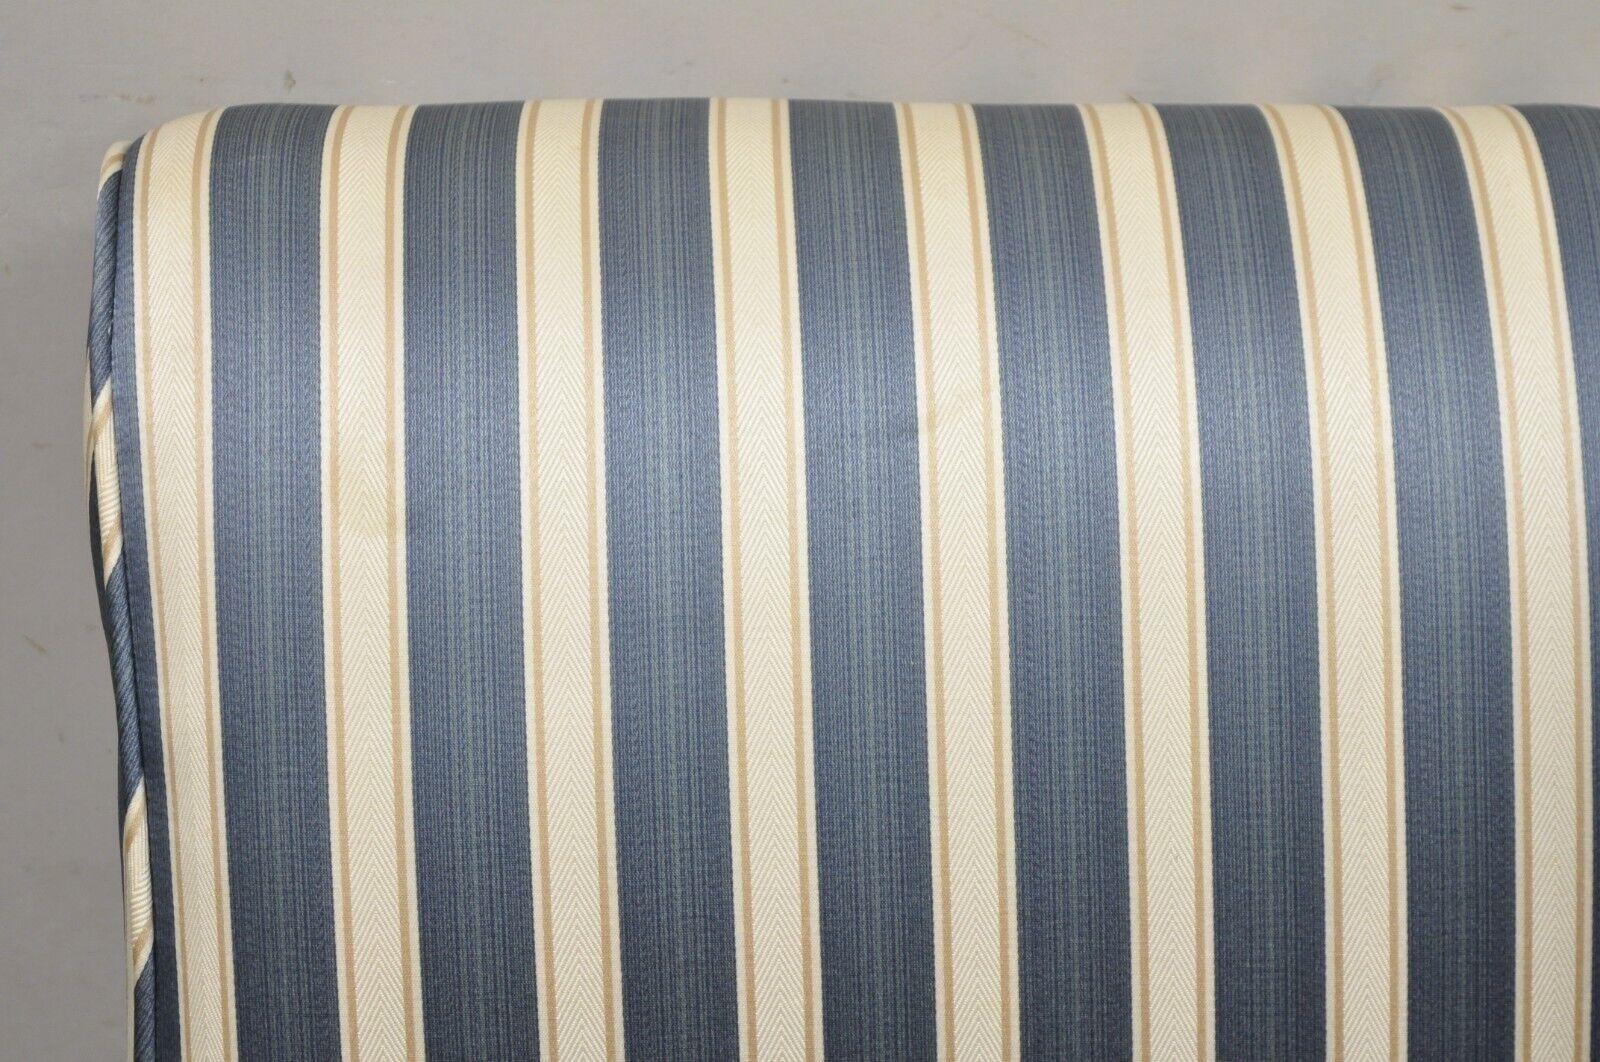 Fabric Custom Blue & Cream Striped Parsons Dining Chairs w/ Button Backs - Set of 6